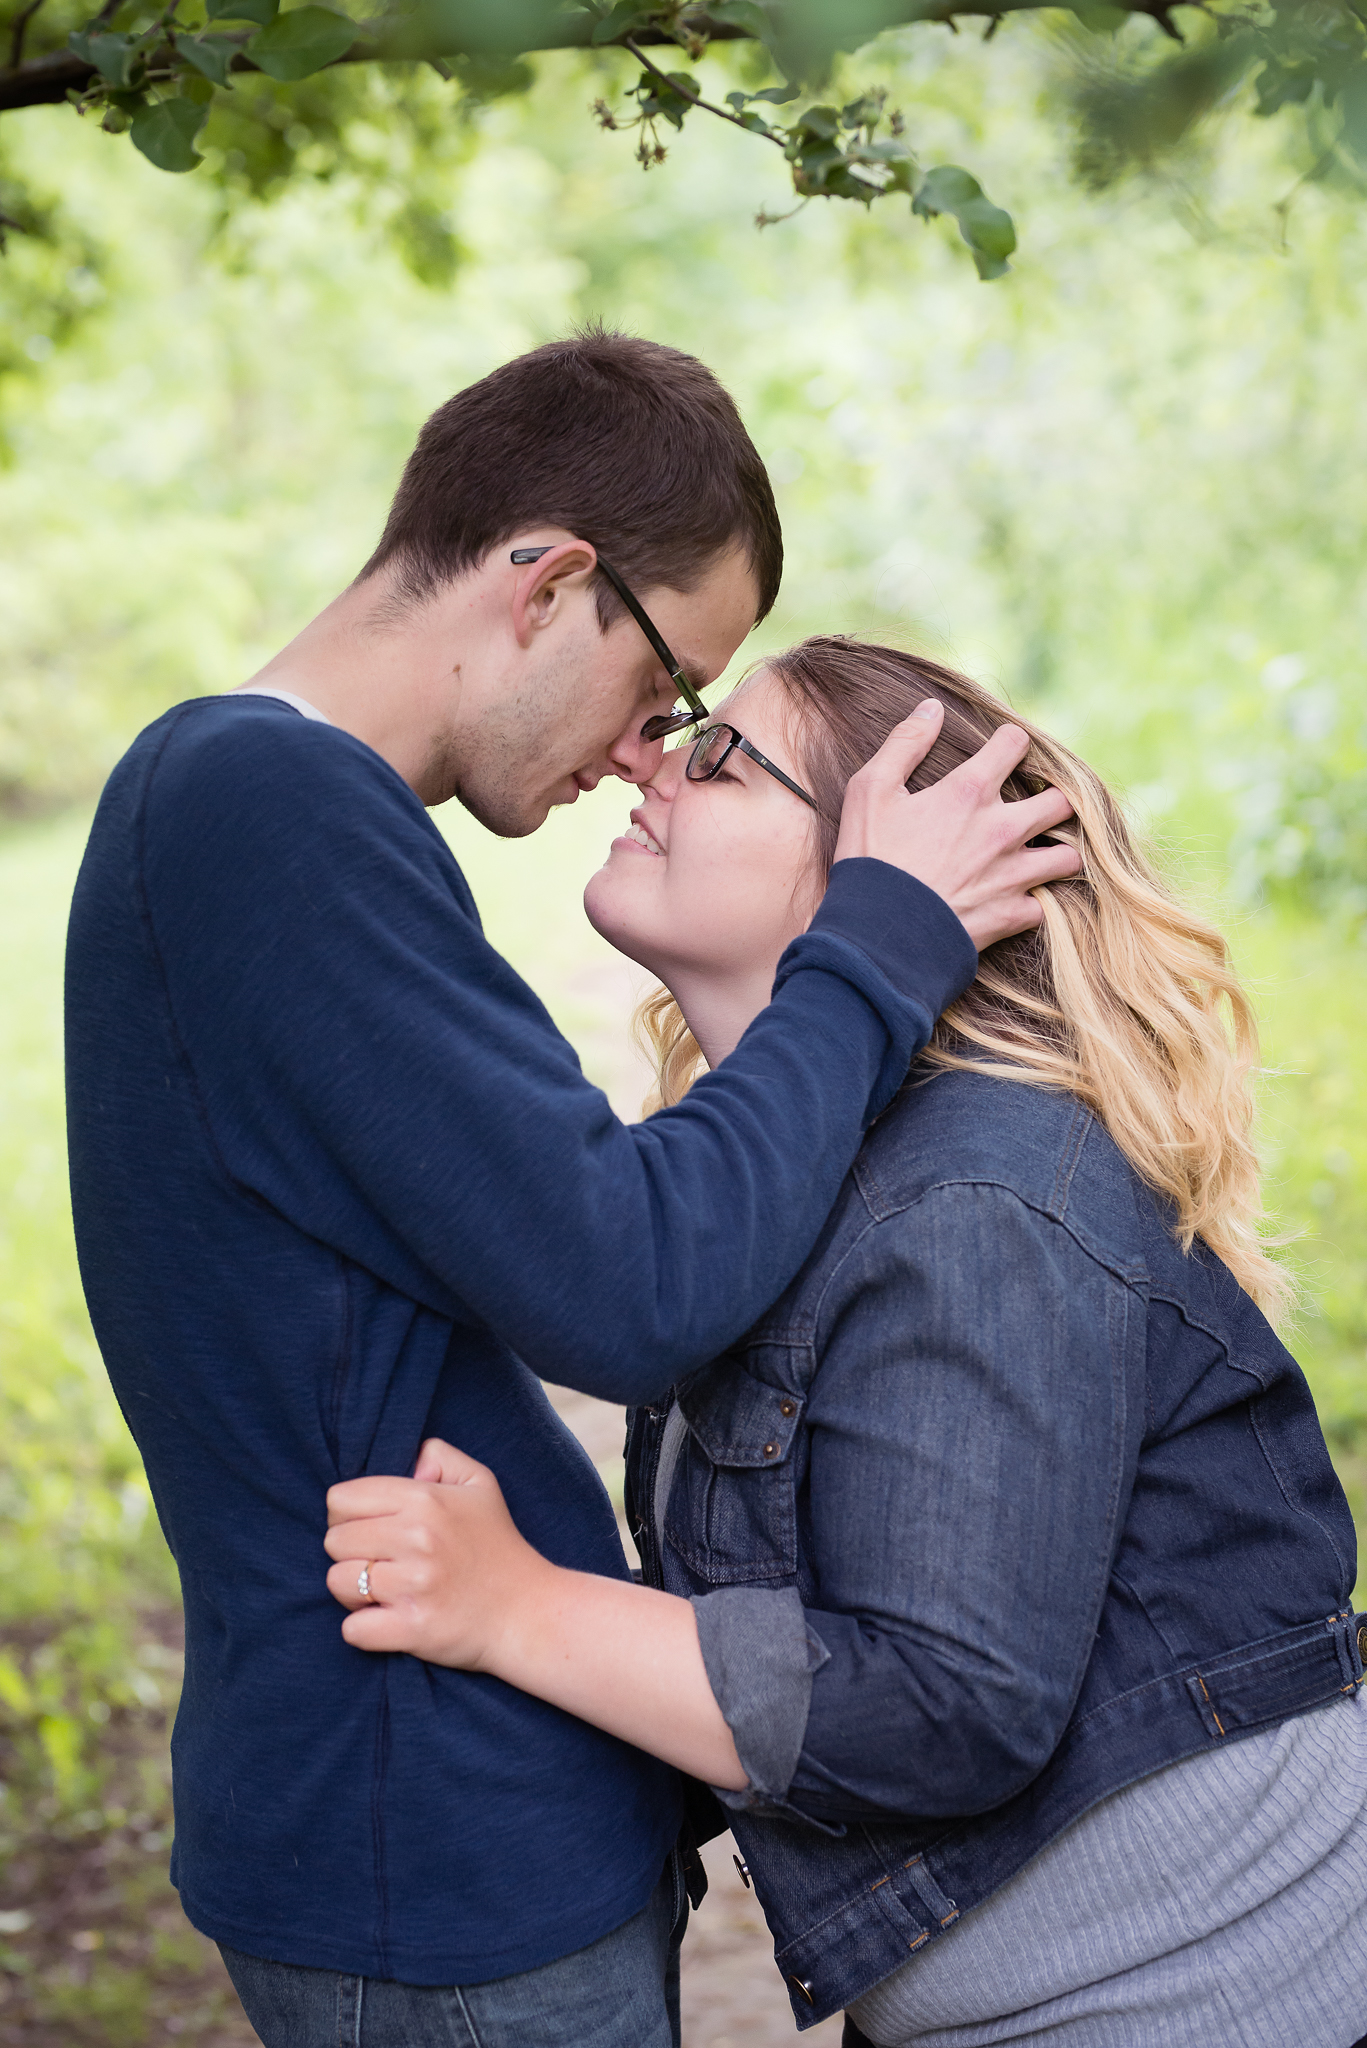 Couples280NaomiLuciennePhotography062018-2-Edit.jpg